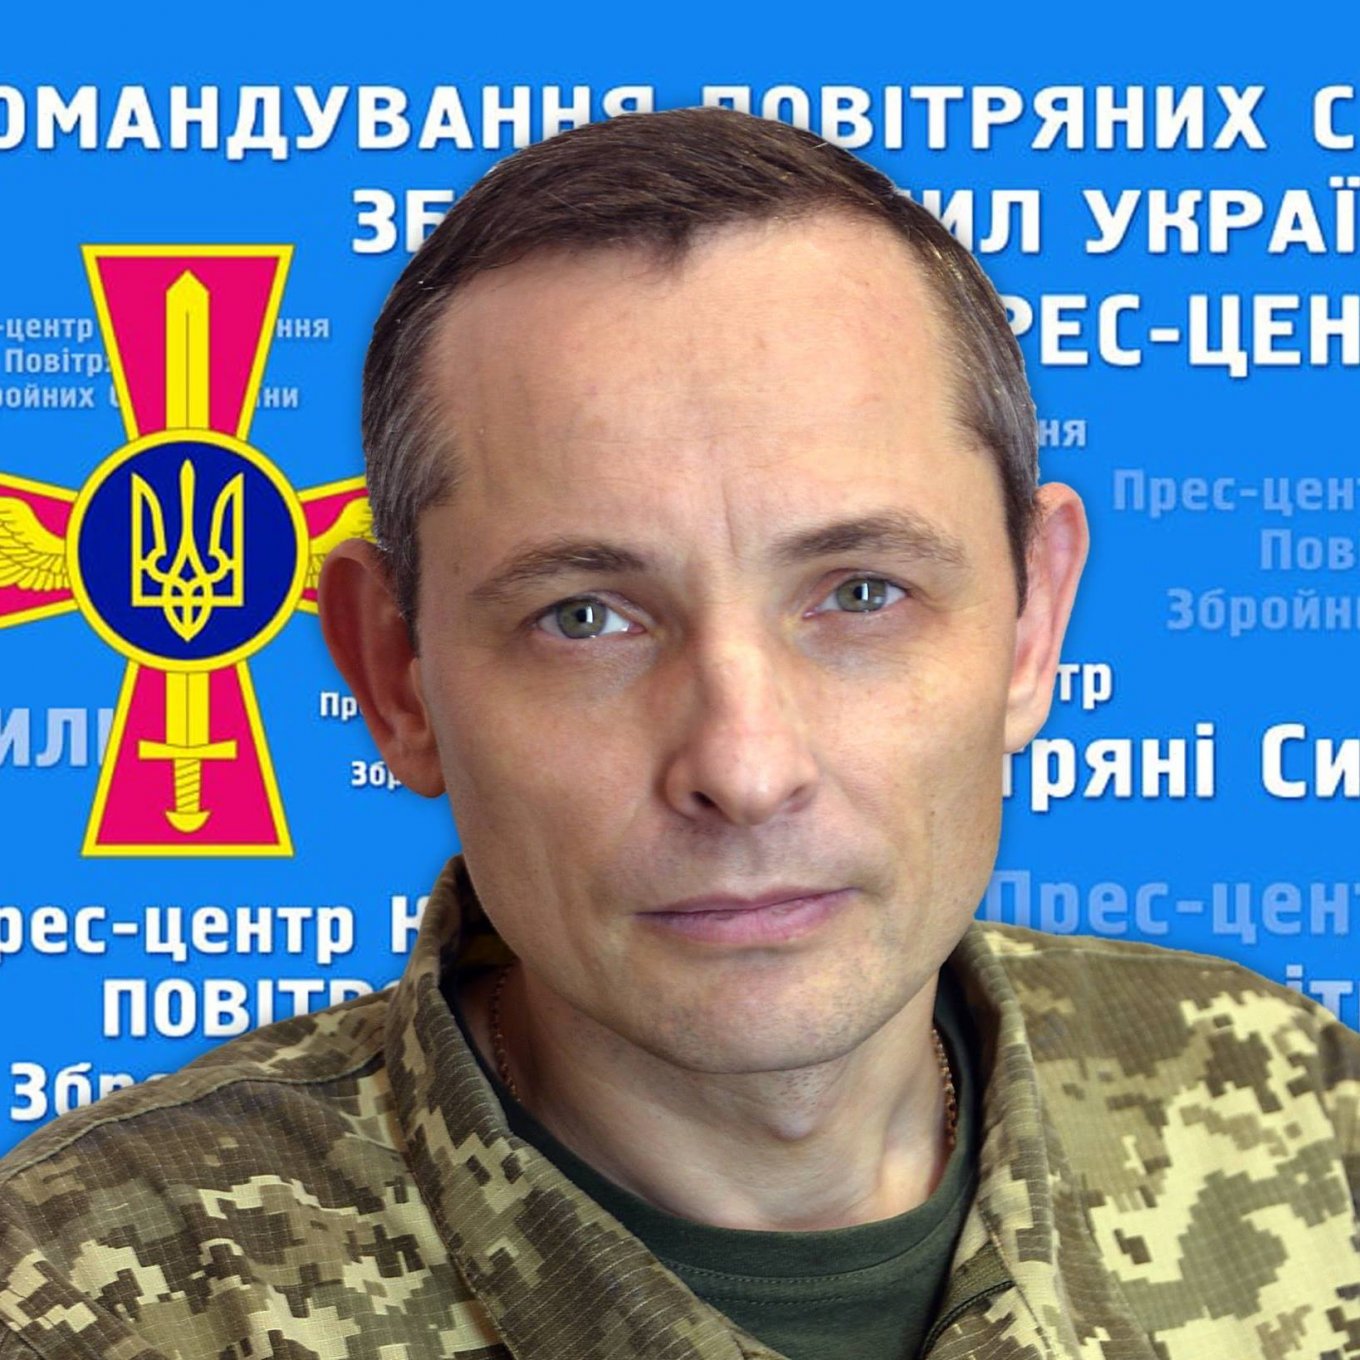 Yuriy Ignat, Ukraine’s Air Force Preparing For the Transition to Western Equipment, Defense Express